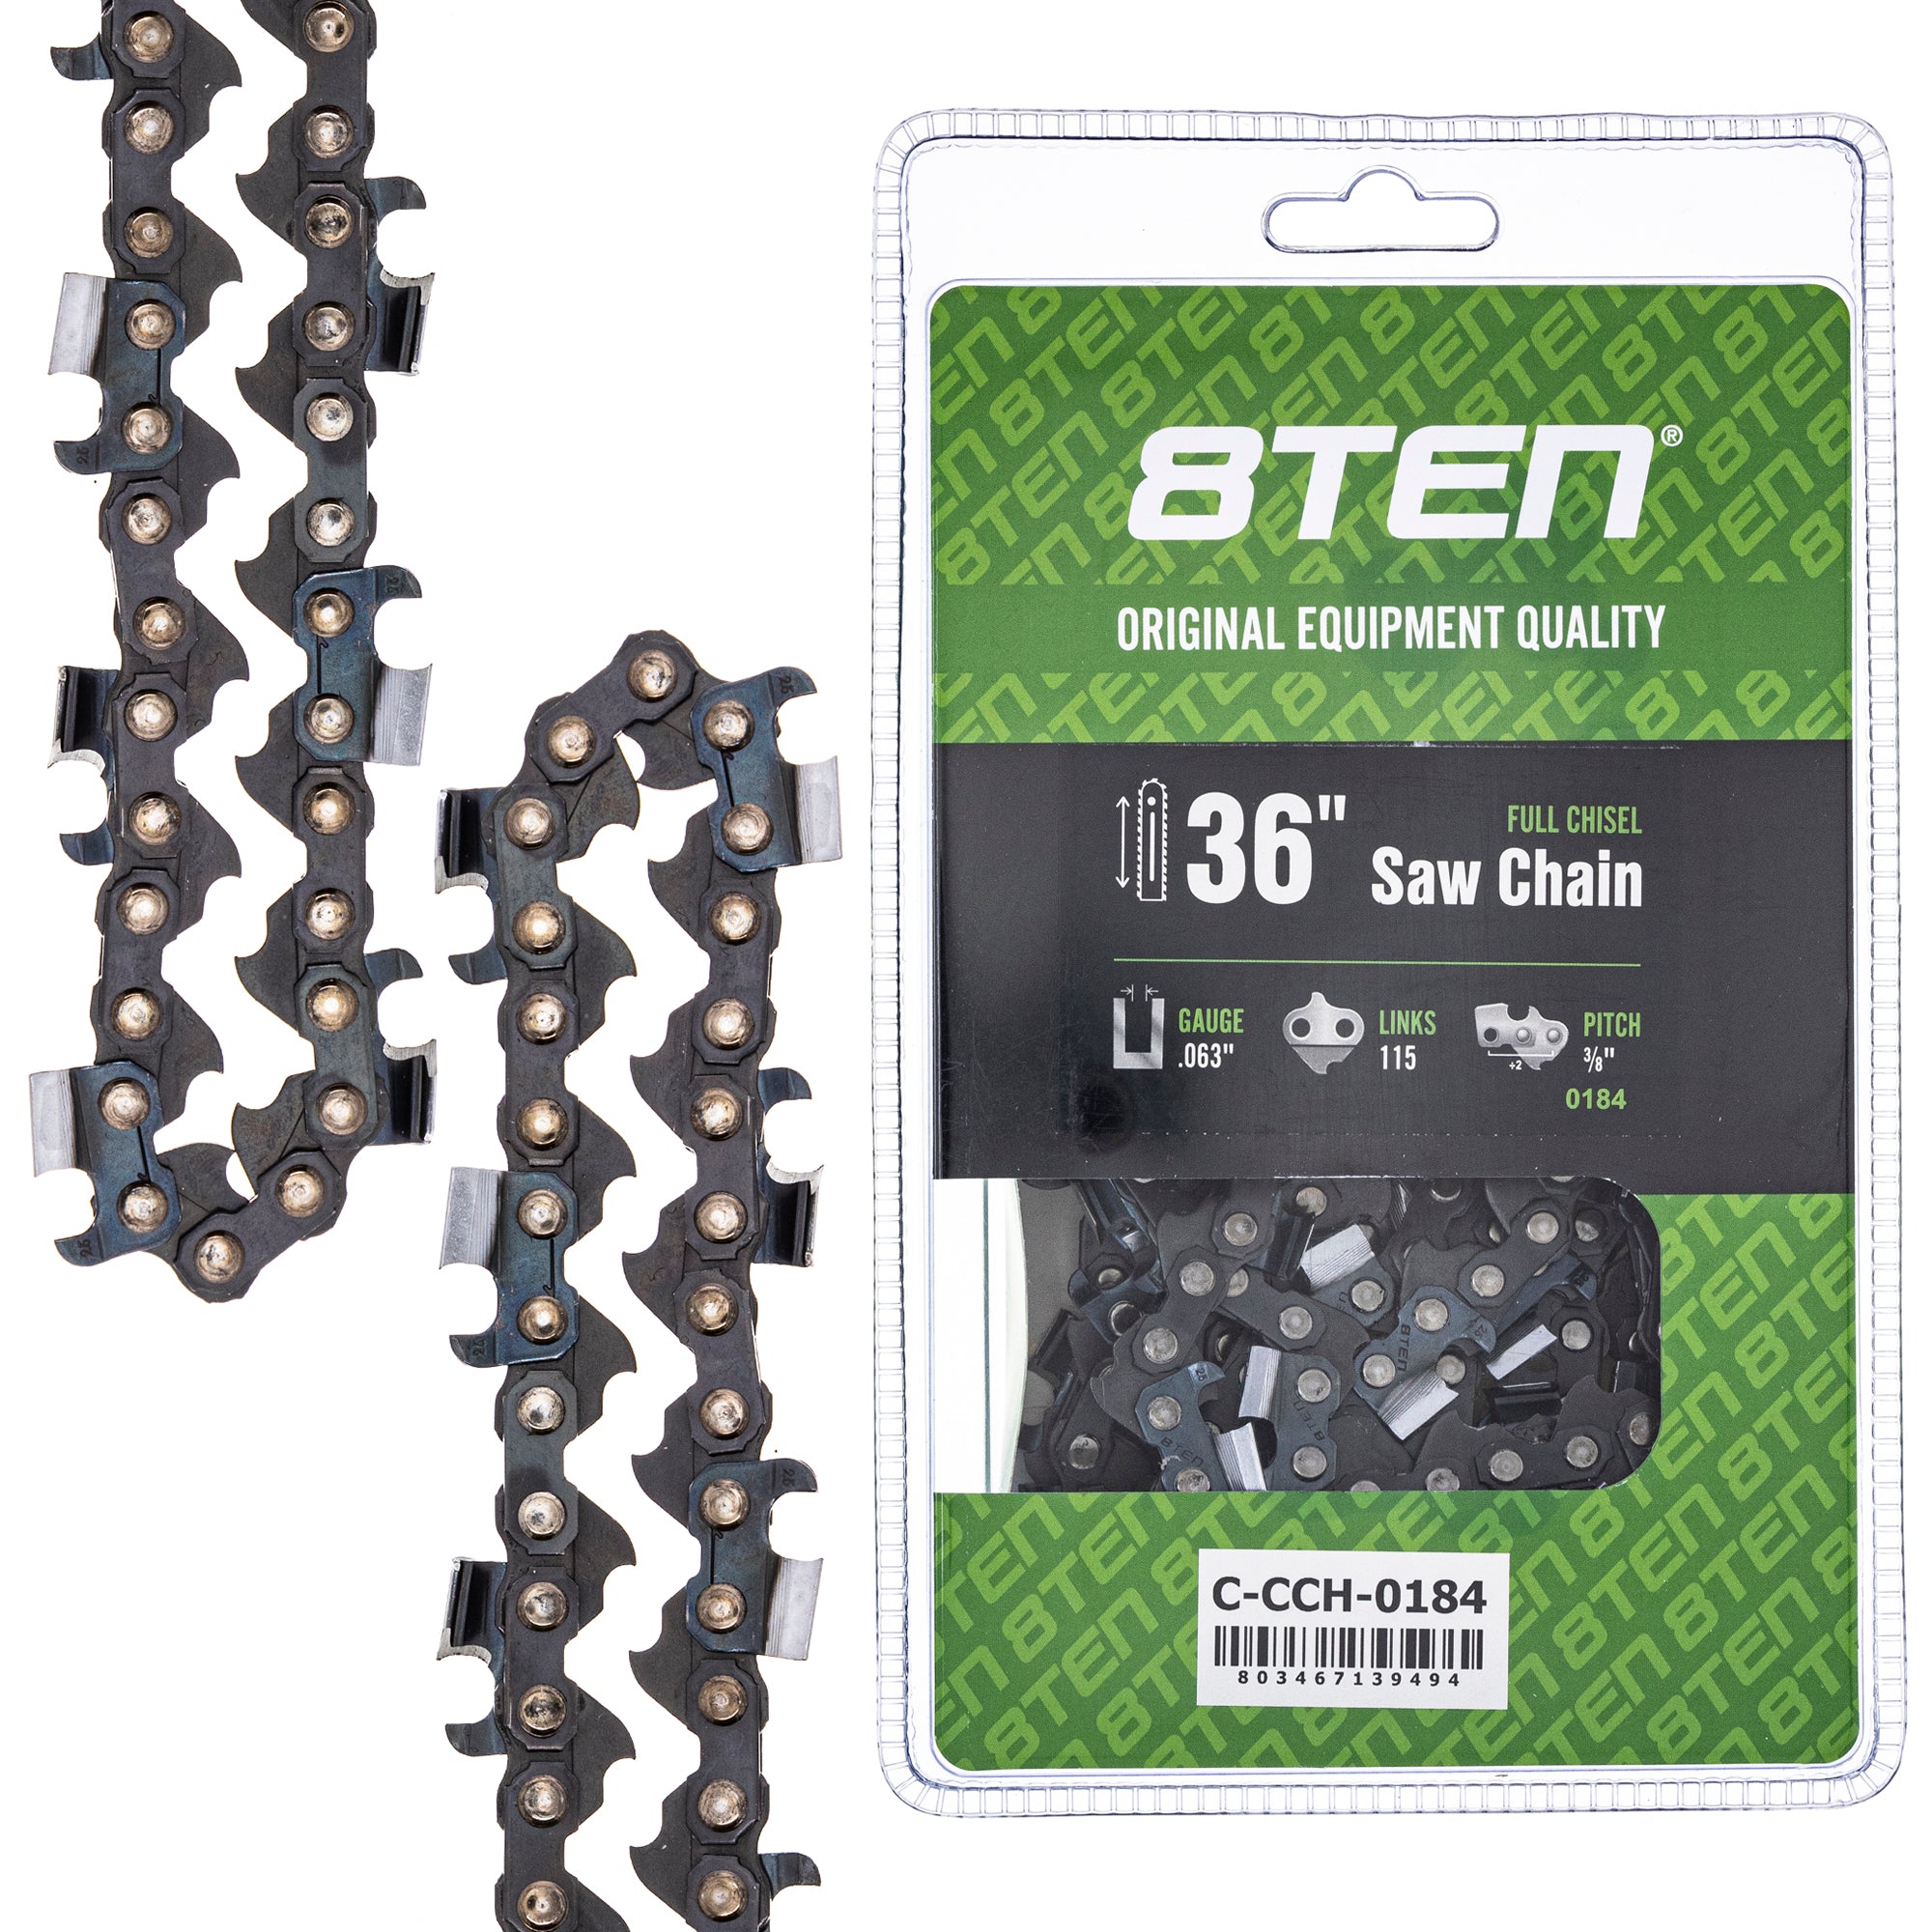 Chainsaw Chain 36 Inch .063 3/8 115DL for zOTHER Oregon PS DCS9010FL DCS9000 DCS7901 8TEN 810-CCC2306H